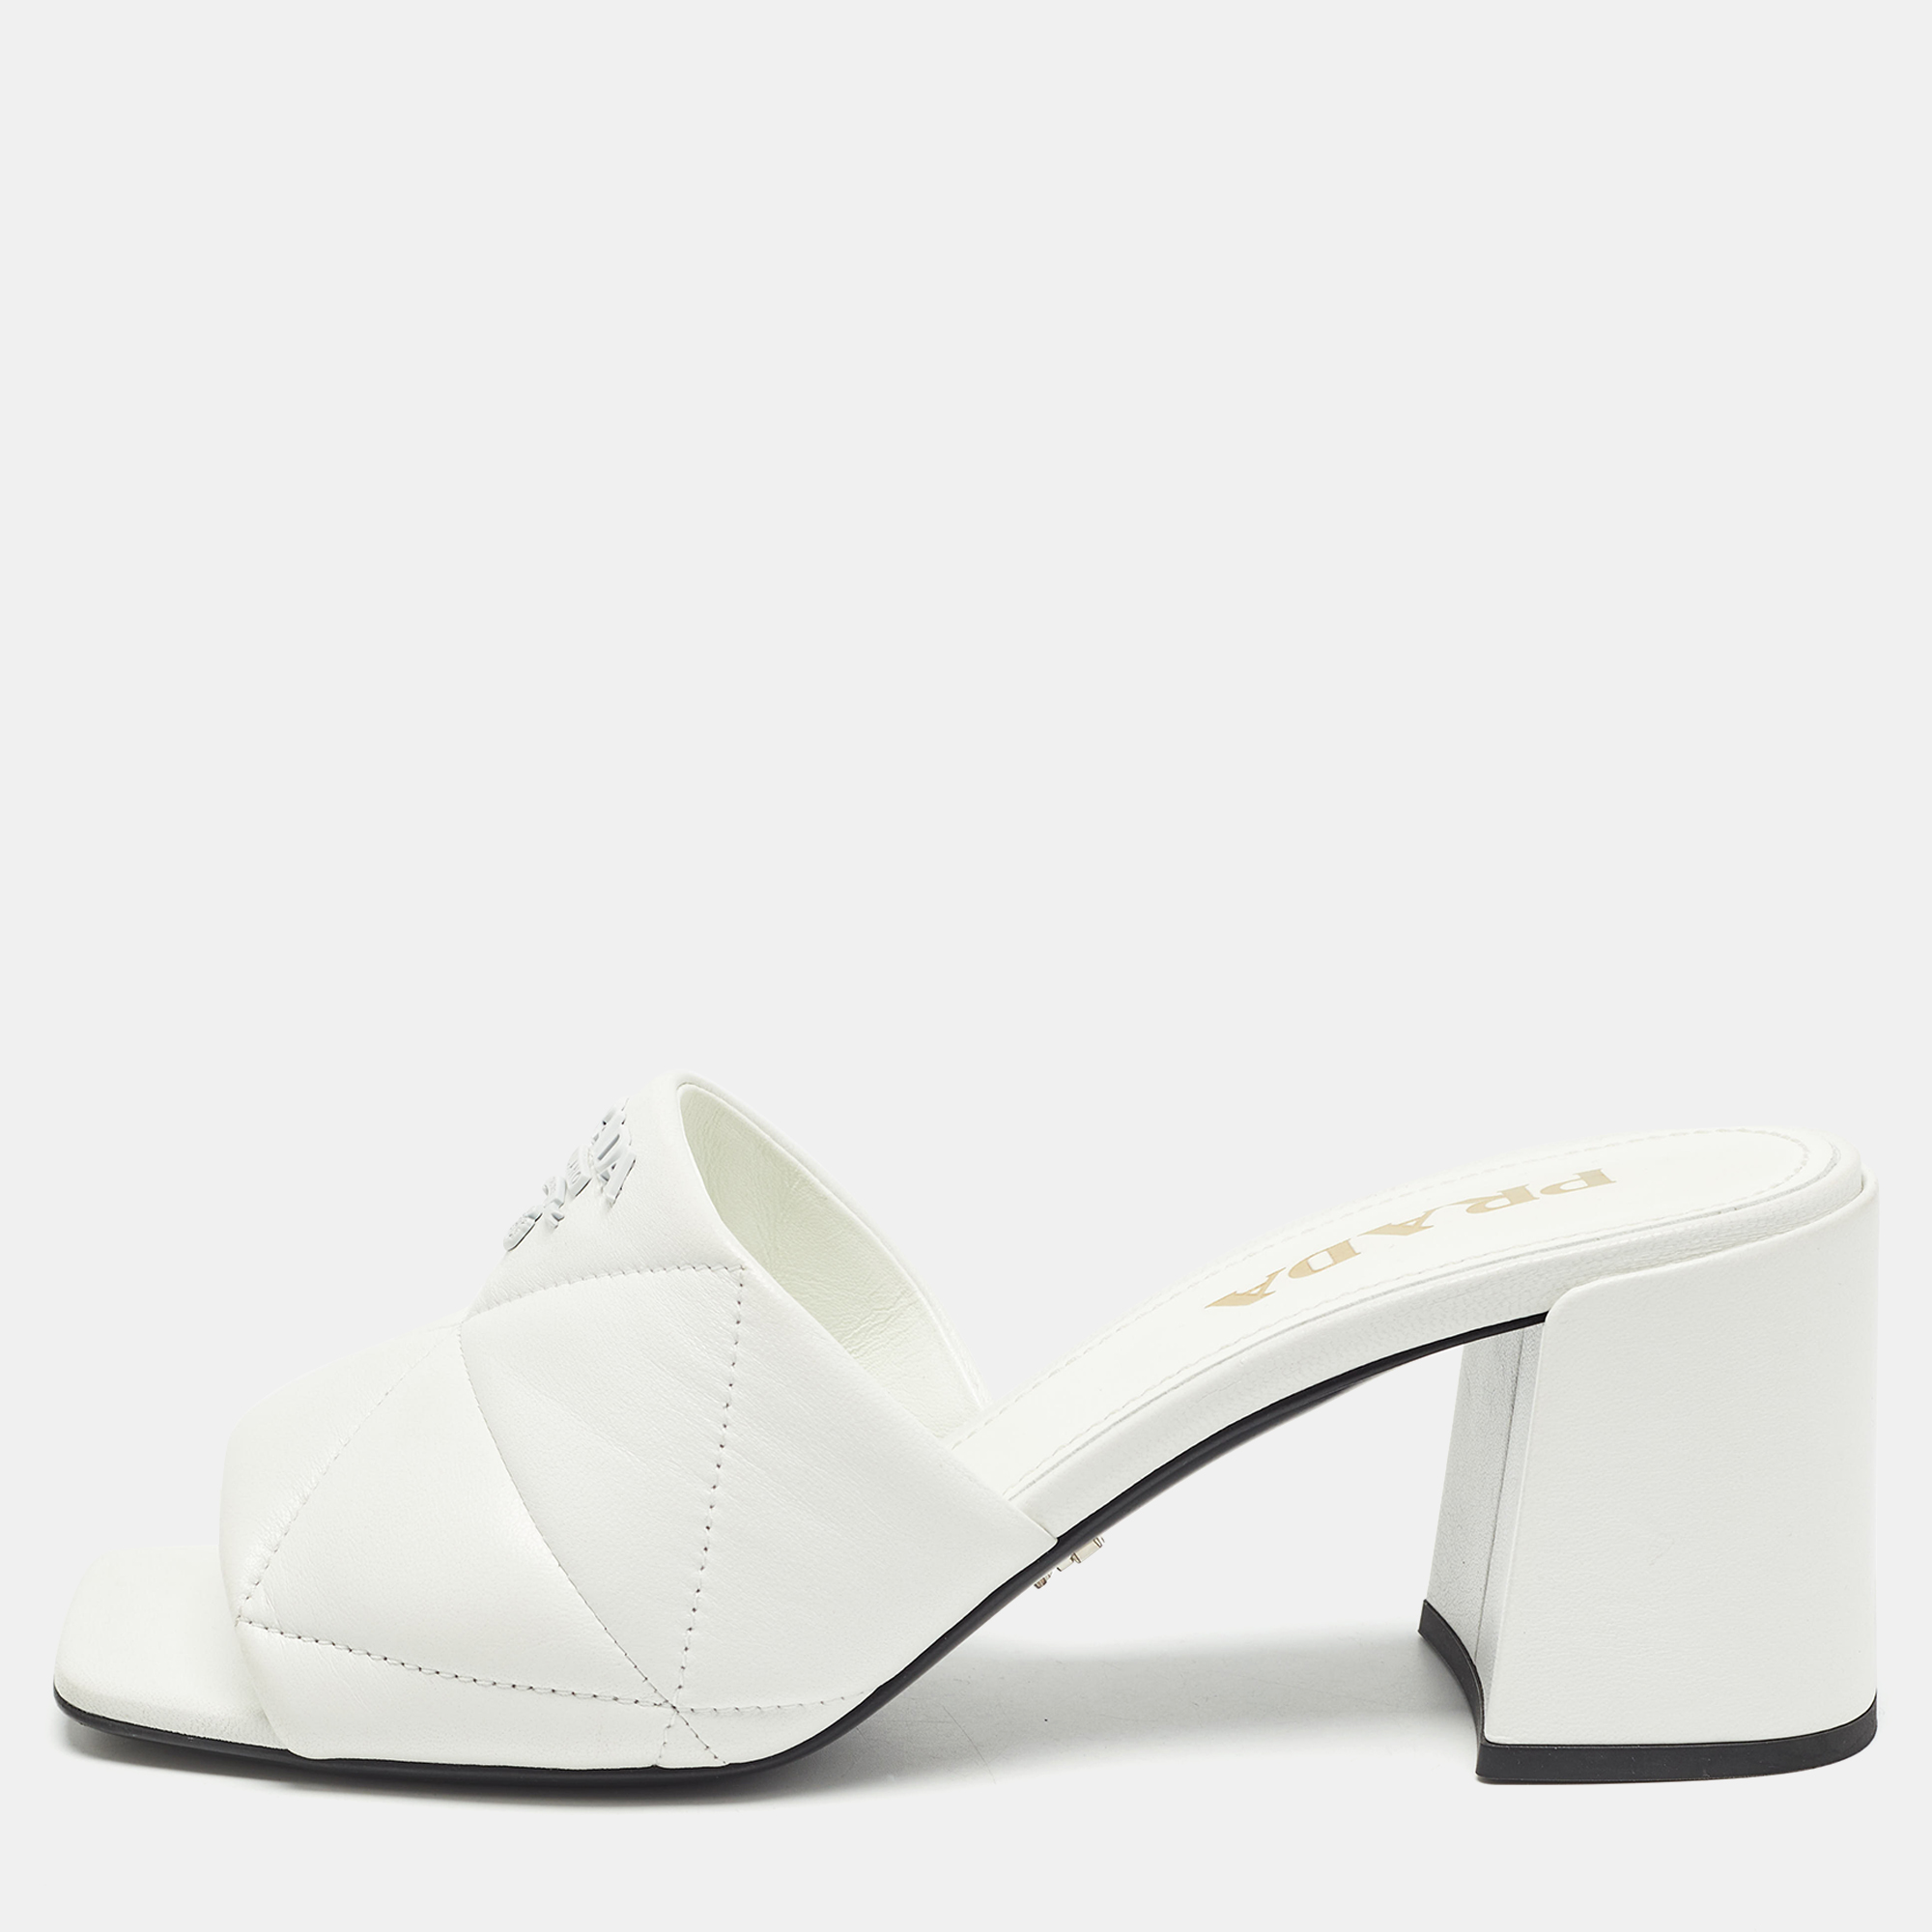 

Prada White Quilted Leather Slide Sandals Size